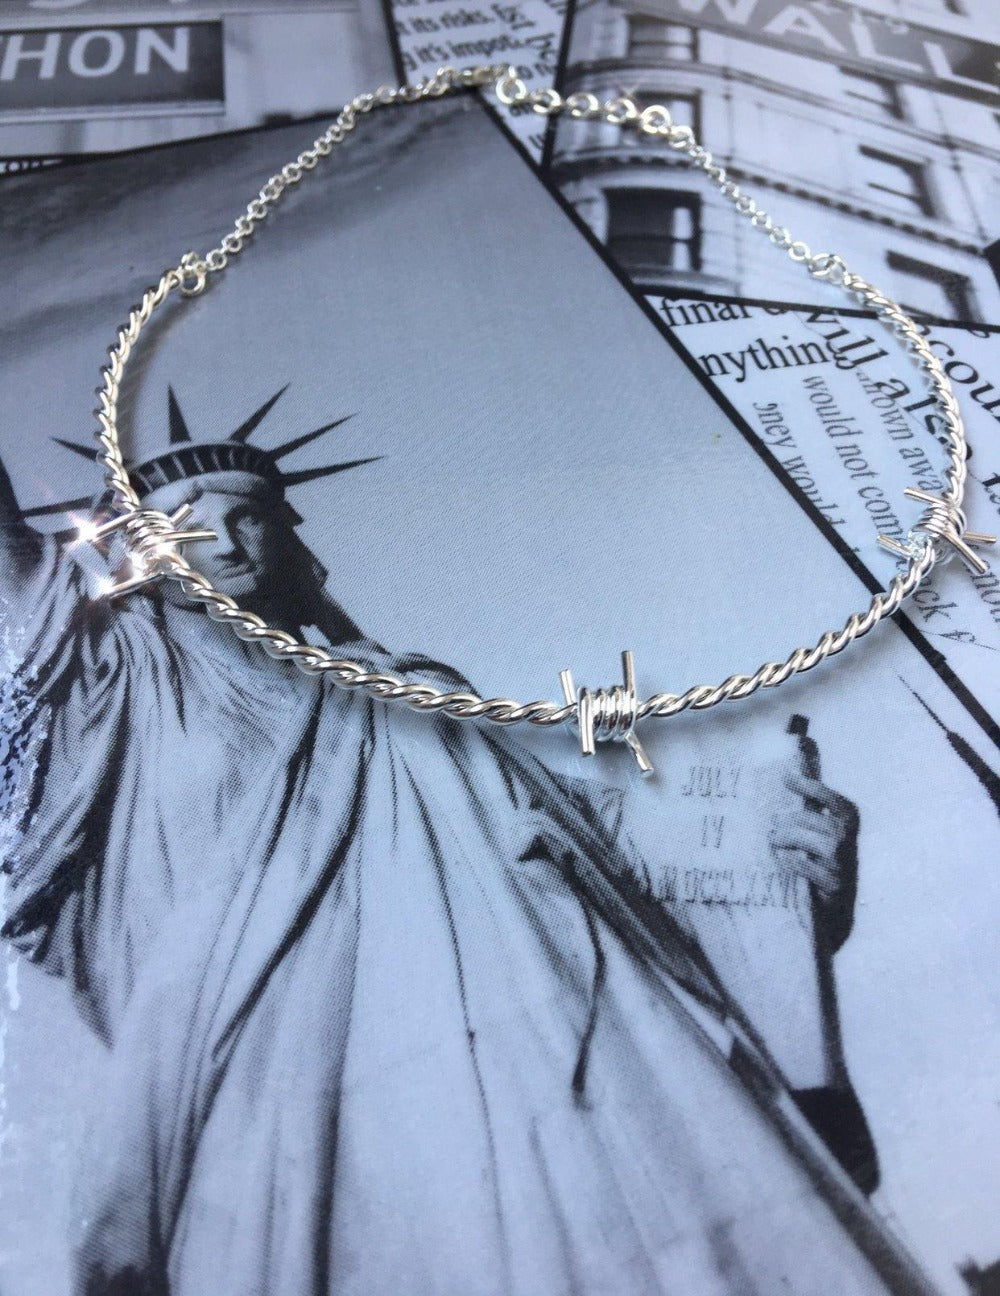 The Kabul House Essential Barb Wire Choker - Blingistan, silver barbwire necklace on statue of liberty print.